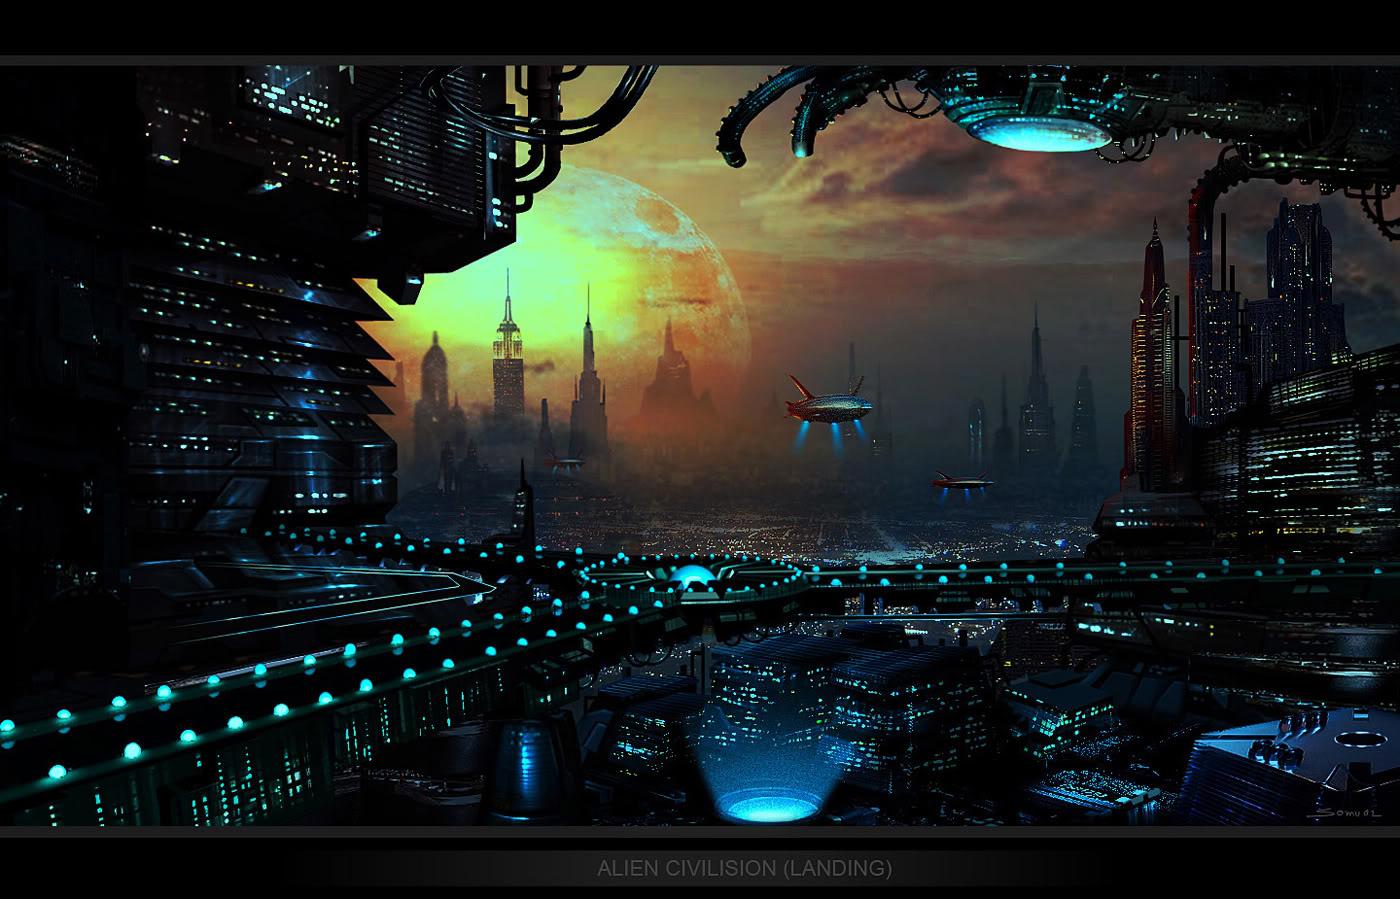 Illustration of an Alien civilization over an unknown but technologically advanced planet